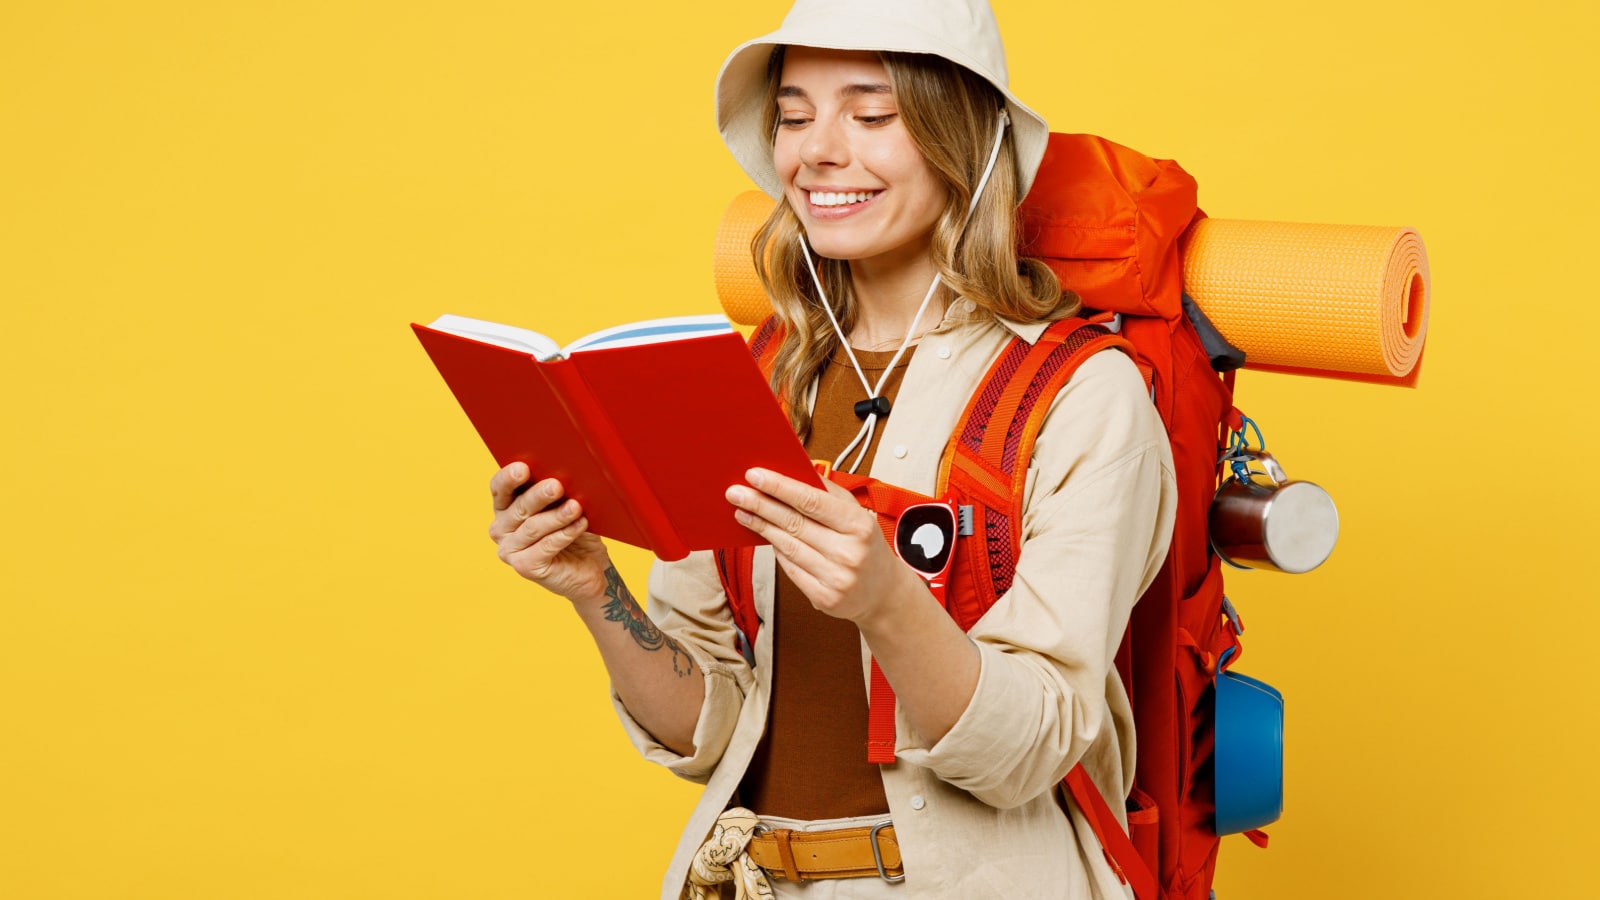 Young smiling happy fun woman carry backpack with stuff mat read book diary isolated on plain yellow background. Tourist leads active lifestyle walk on spare time. Hiking trek rest travel trip concept